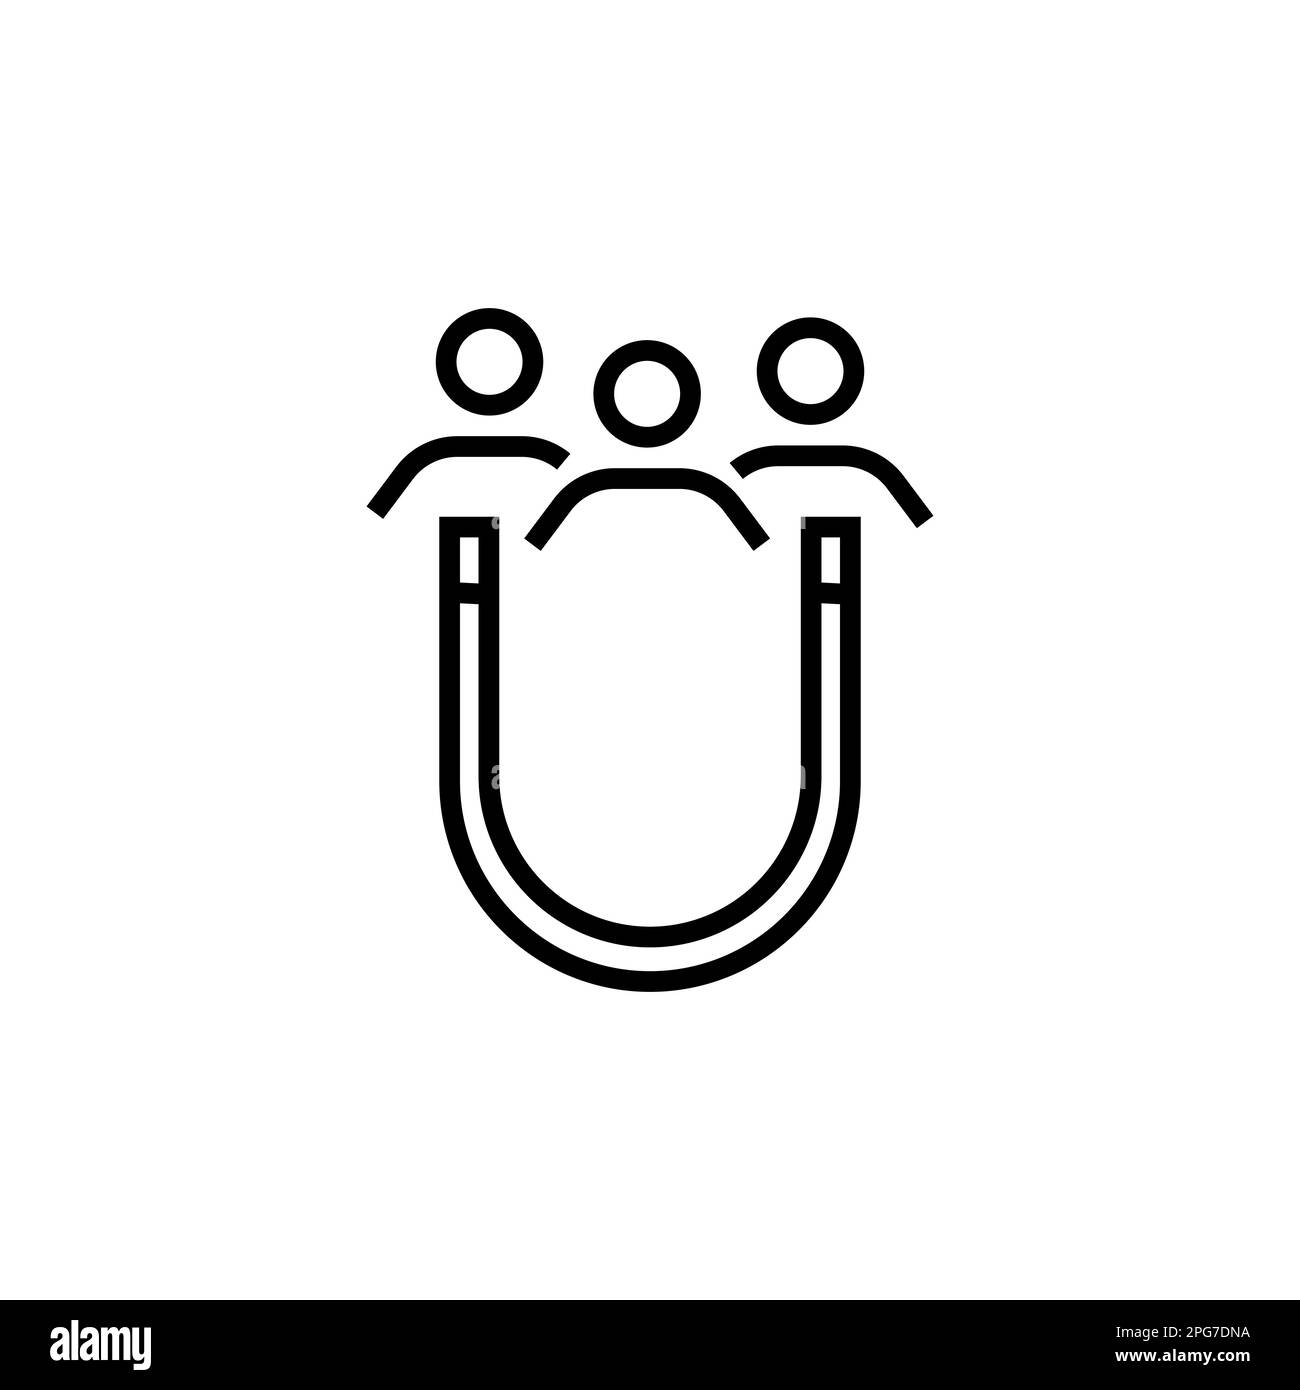 Retention Employee People in Business Company Line Icon. Lead Attract User Customer Linear Pictogram. Magnet Acquisition Potential Client Outline Icon Stock Vector